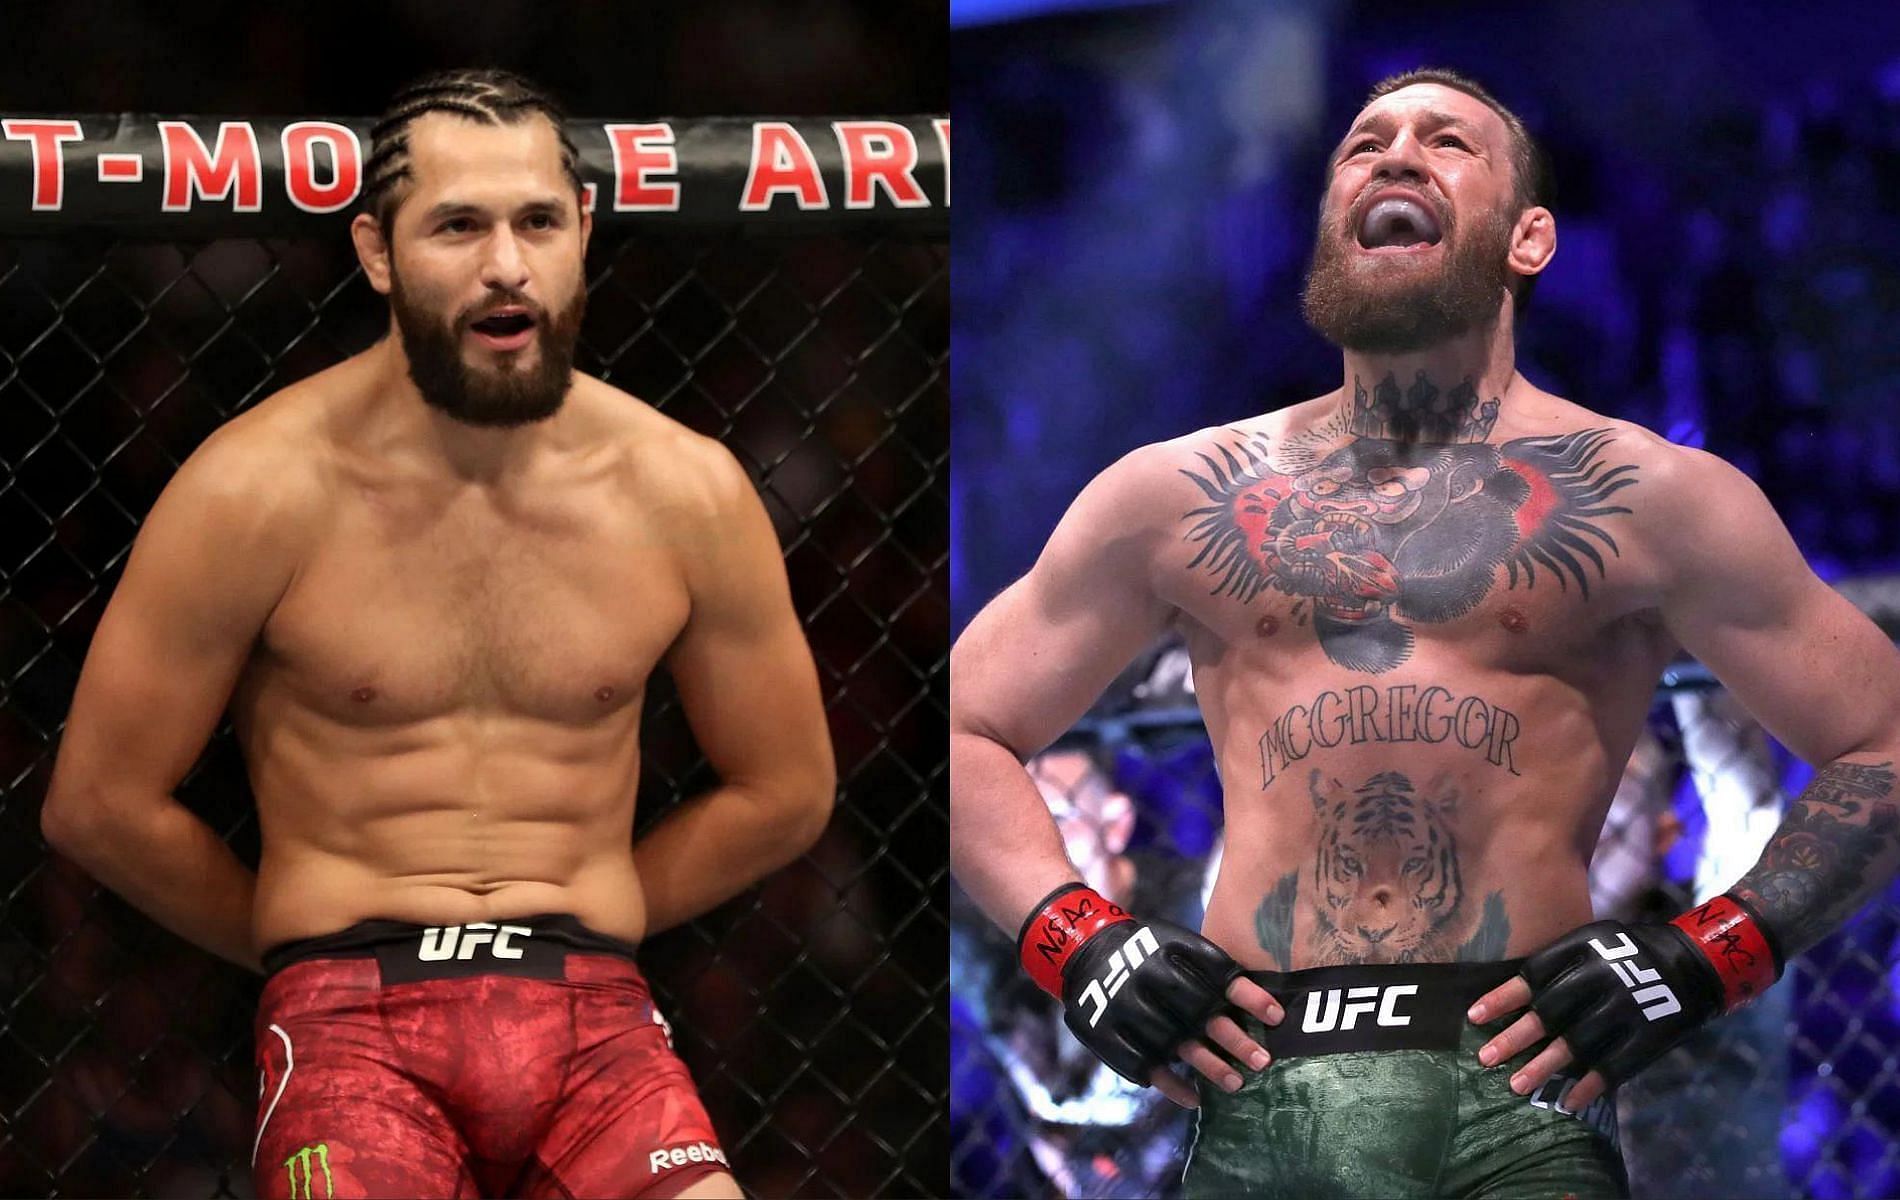 Conor McGregor vs. Jorge Masvidal would be an absolute firefight between two of the best strikers in the UFC.